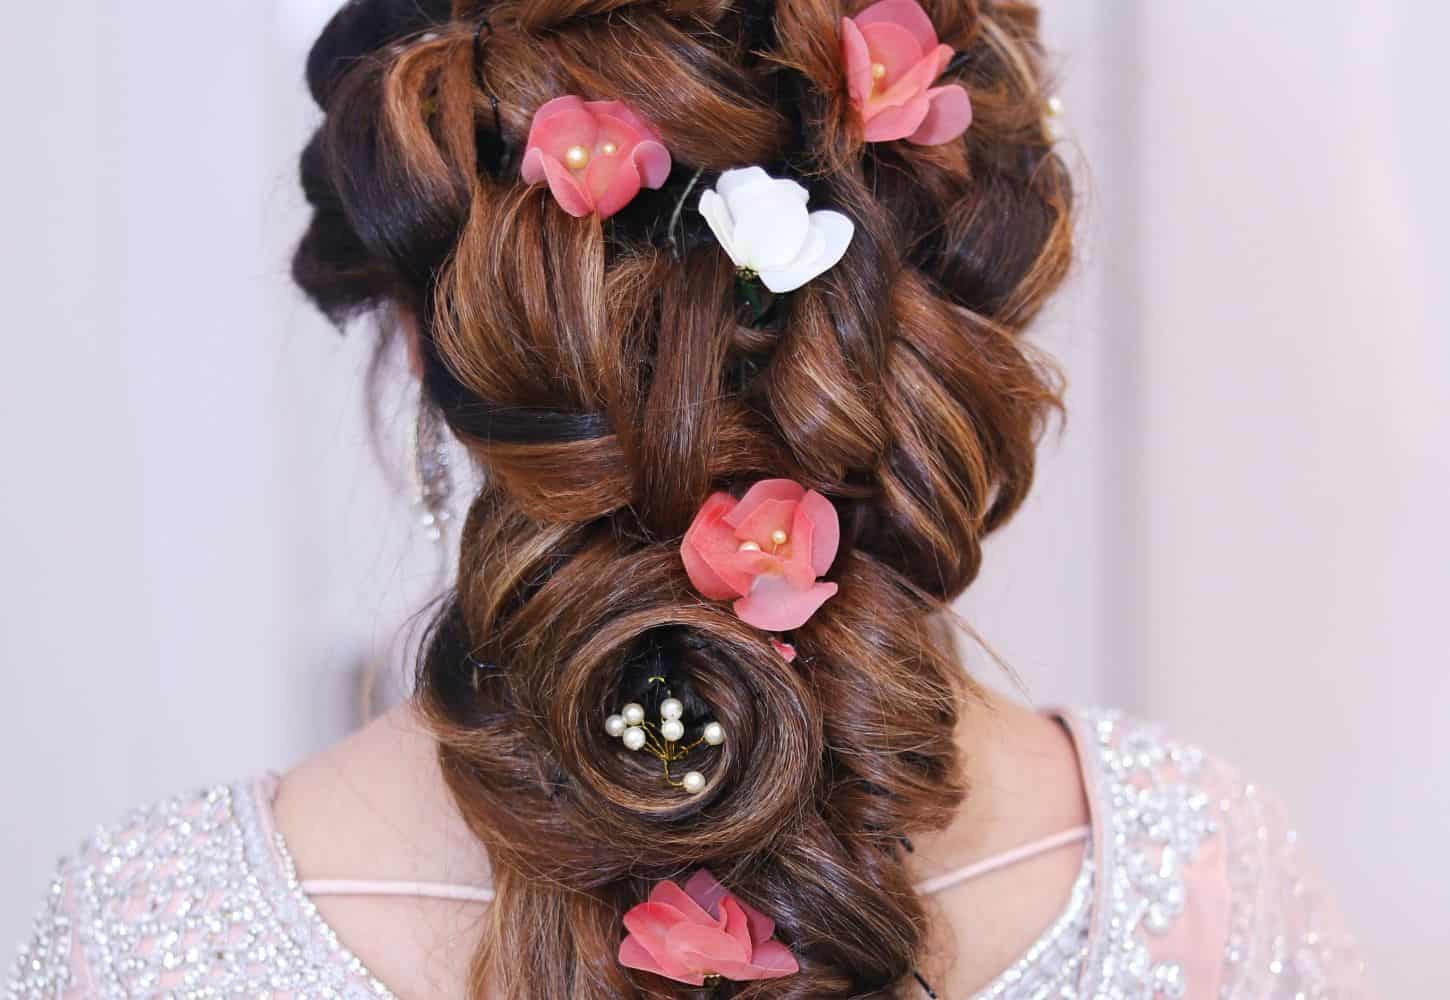 Creative Hair Art: 10 Bold and Unique Hairstyles to Try